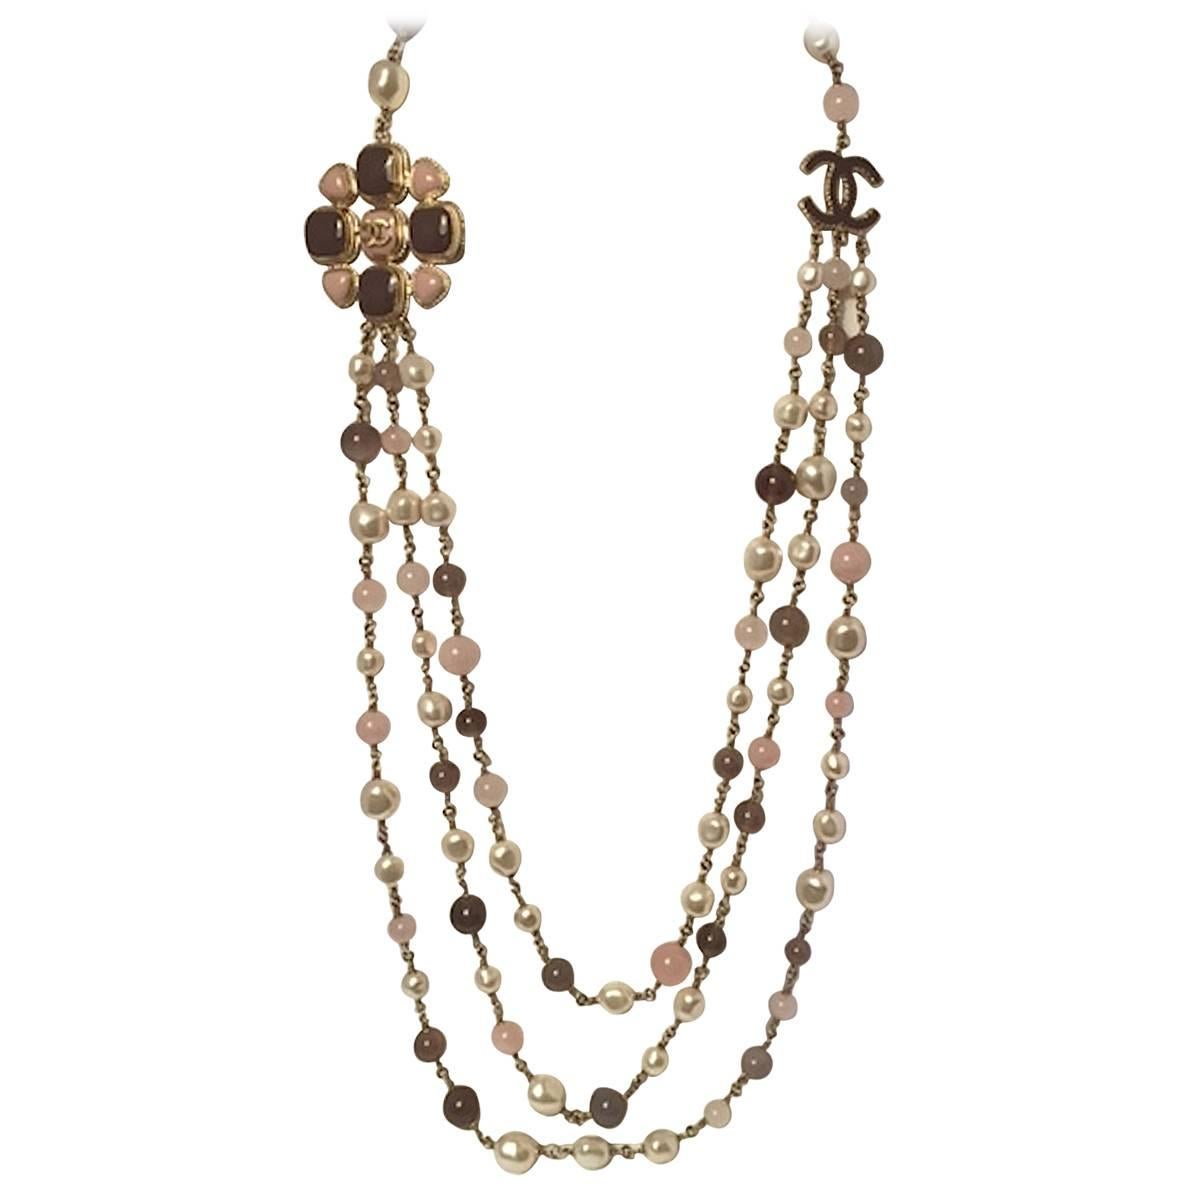 Chanel Three Strand Pearl, Rose Quartz and Agate Bead Necklace